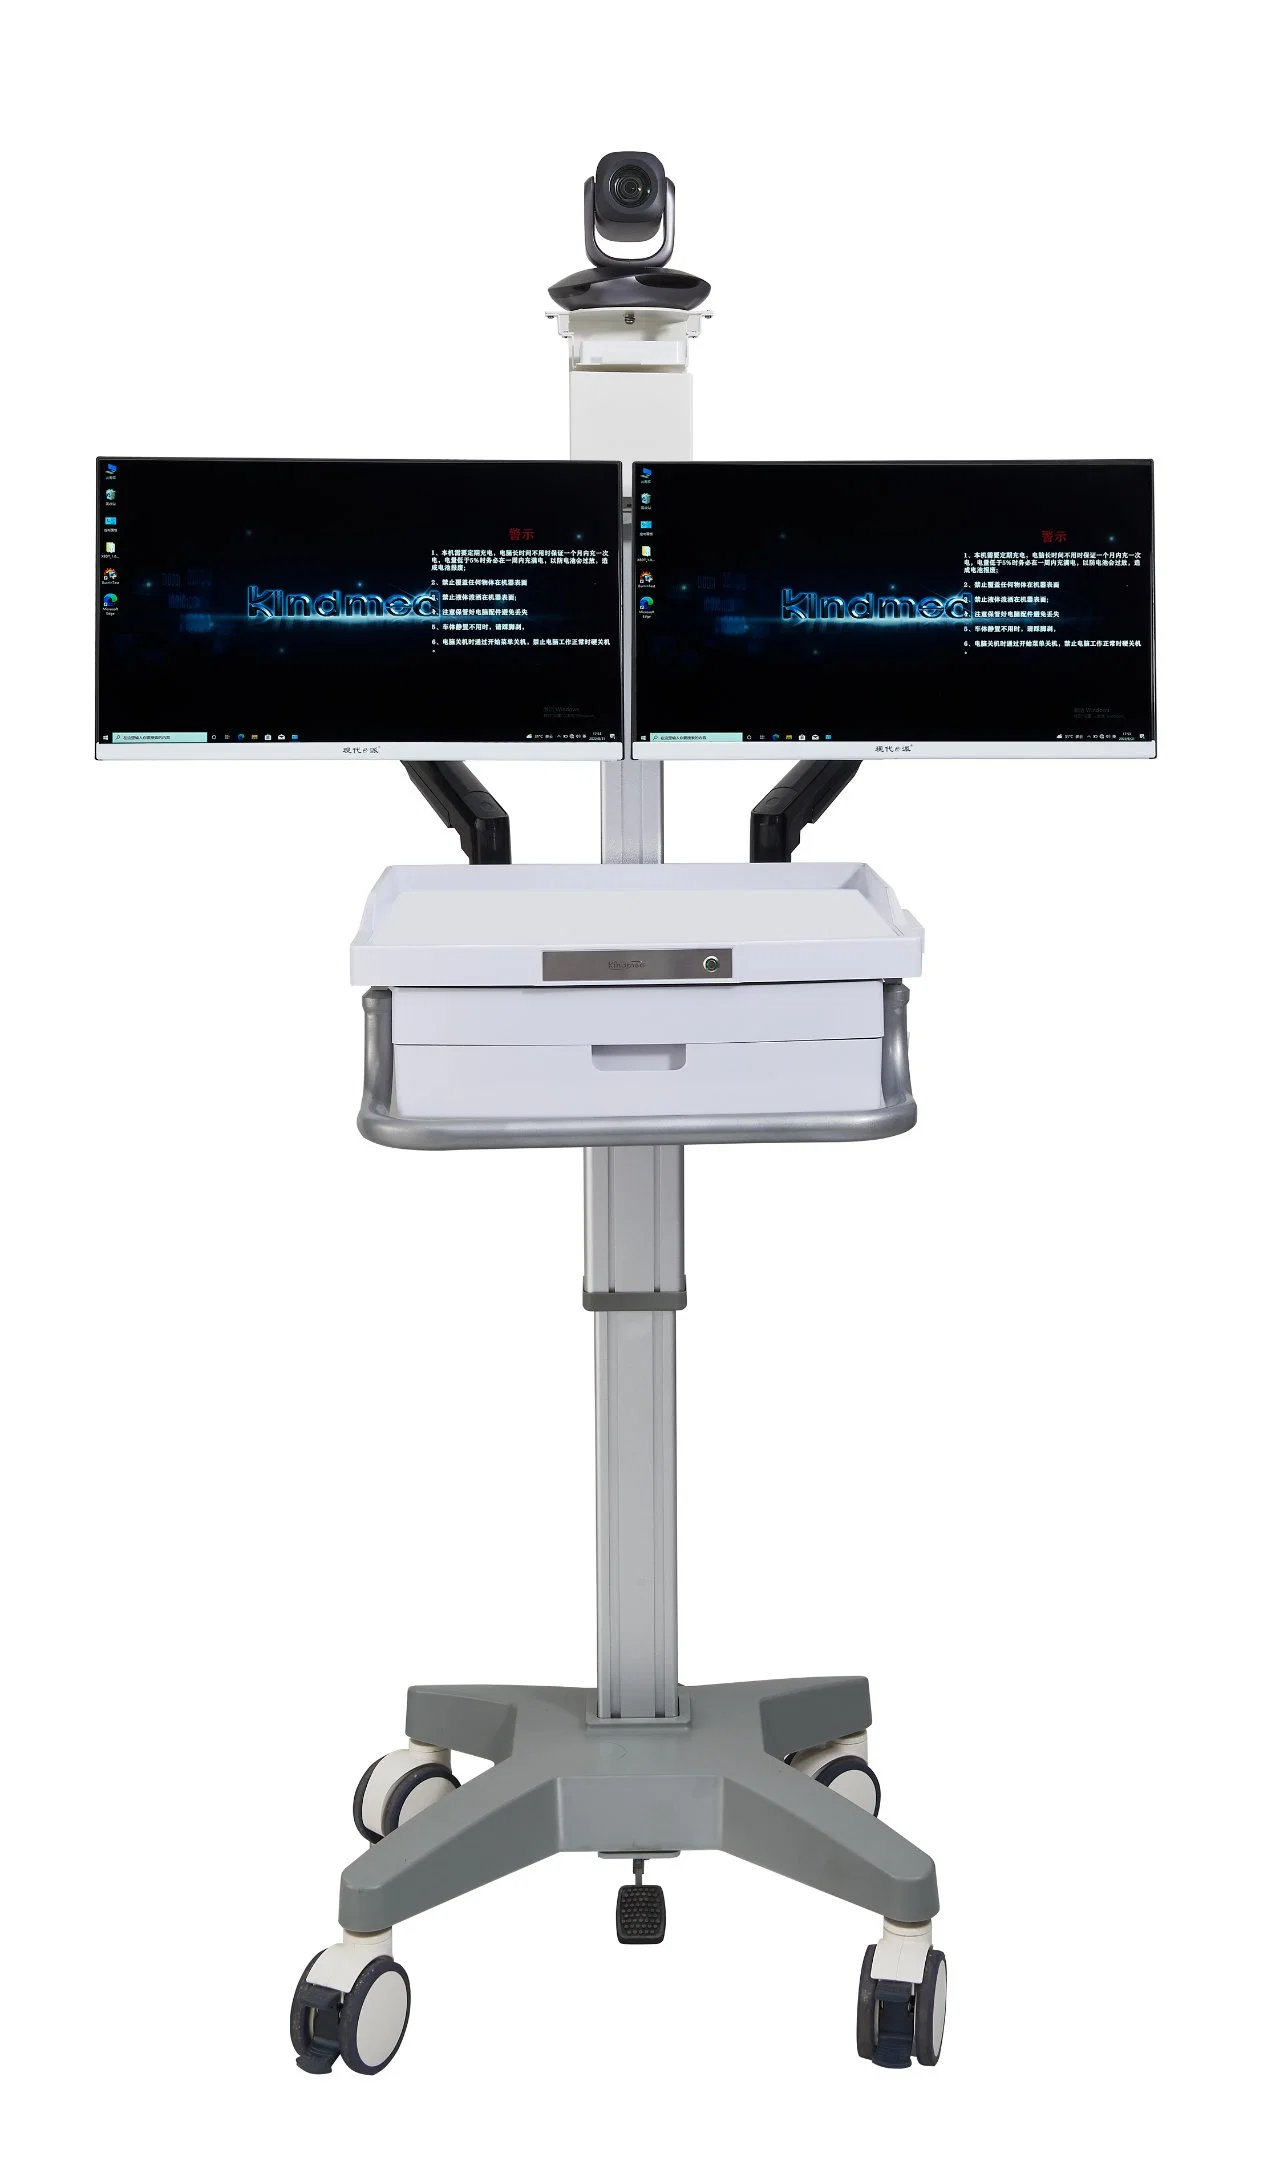 R Series Mobile Battery Powered Telemedicine Computer Cart Workstation with Camera for Medical Computing Video Conferencing as Hospital Equipment- E